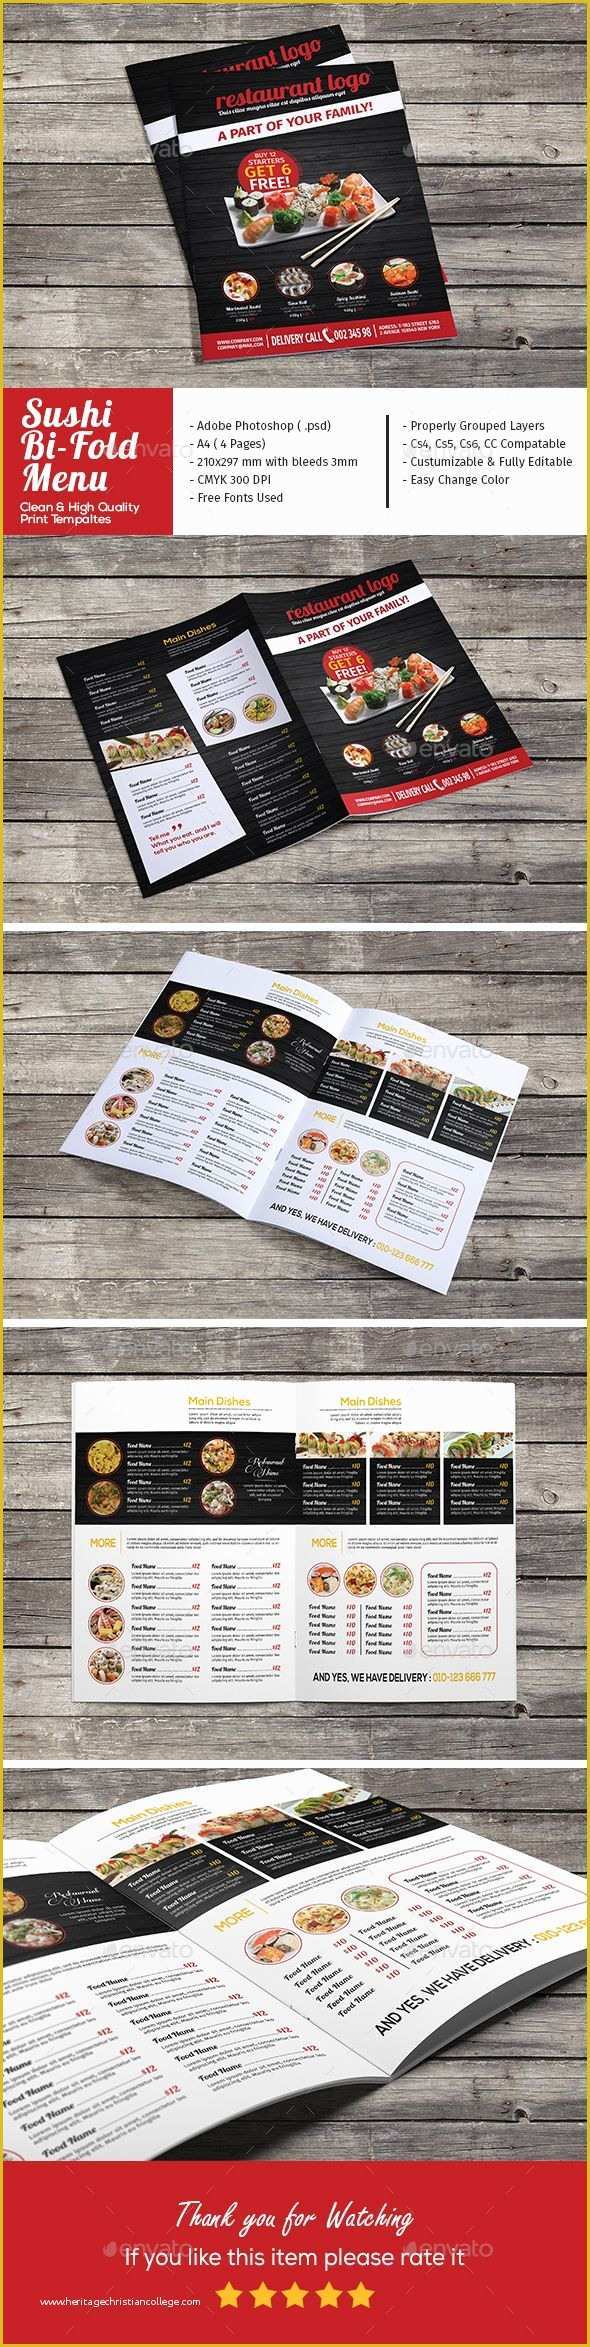 Sushi Menu Template Free Download Of 25 Best Ideas About Sushi Menu On Pinterest